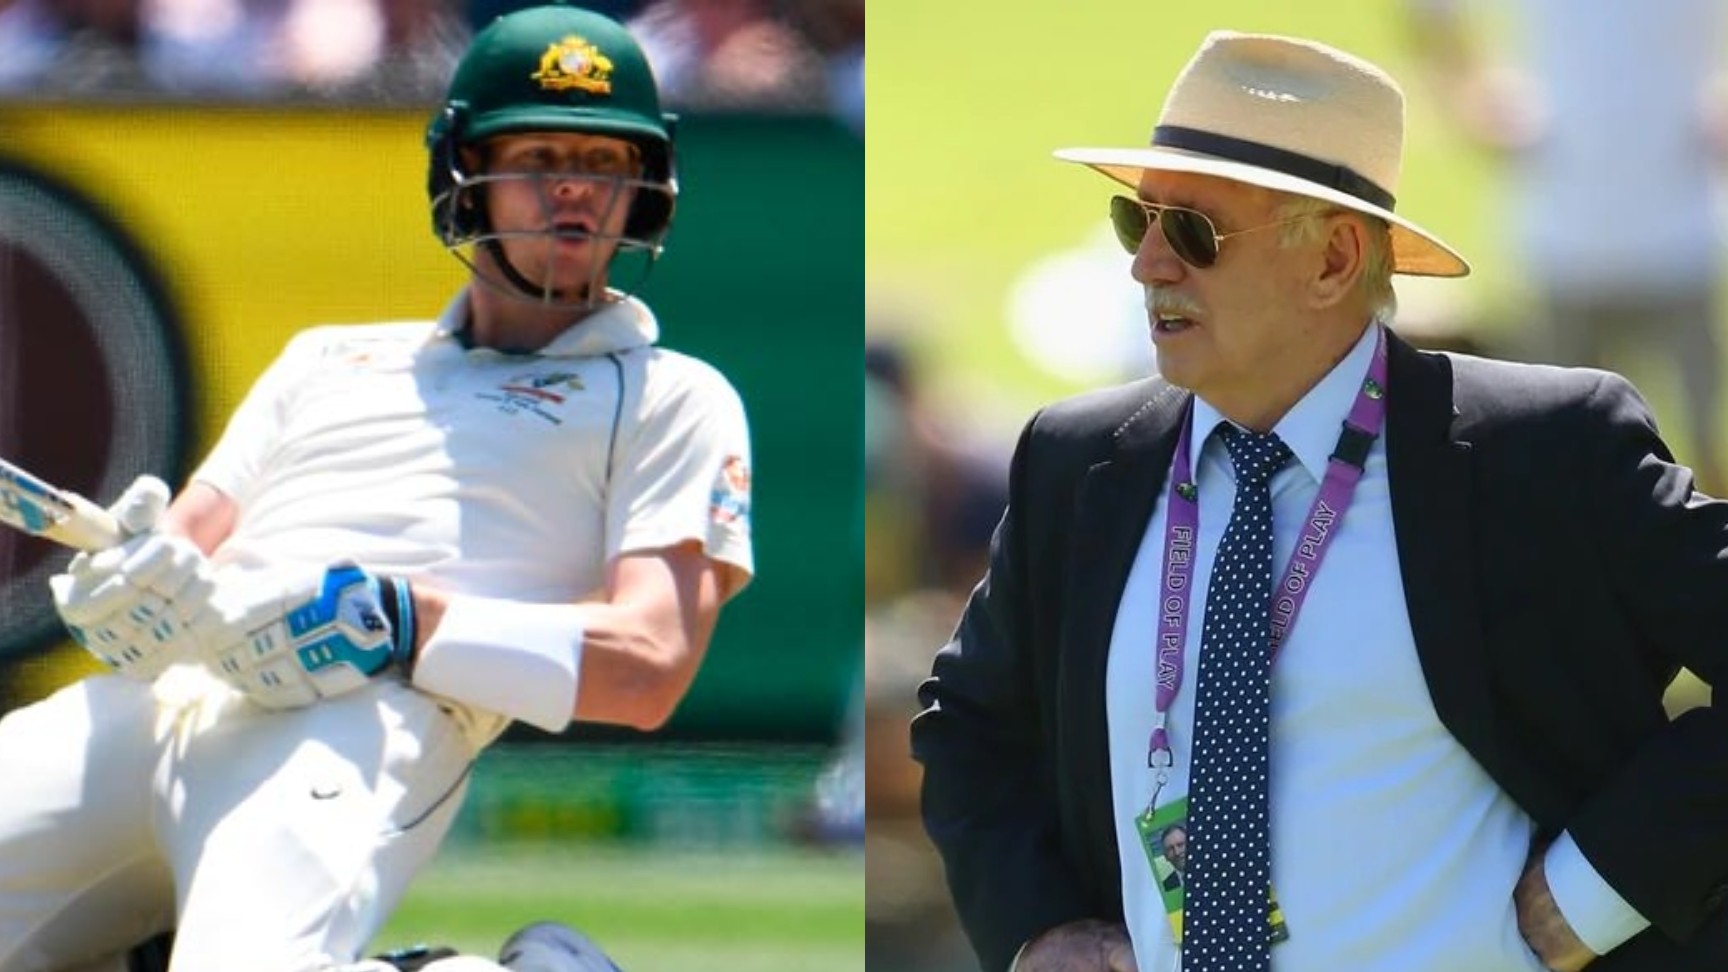 AUS v IND 2020-21: ”No dramas from me,” Steve Smith slams Ian Chappell's outlandish statements on bouncers